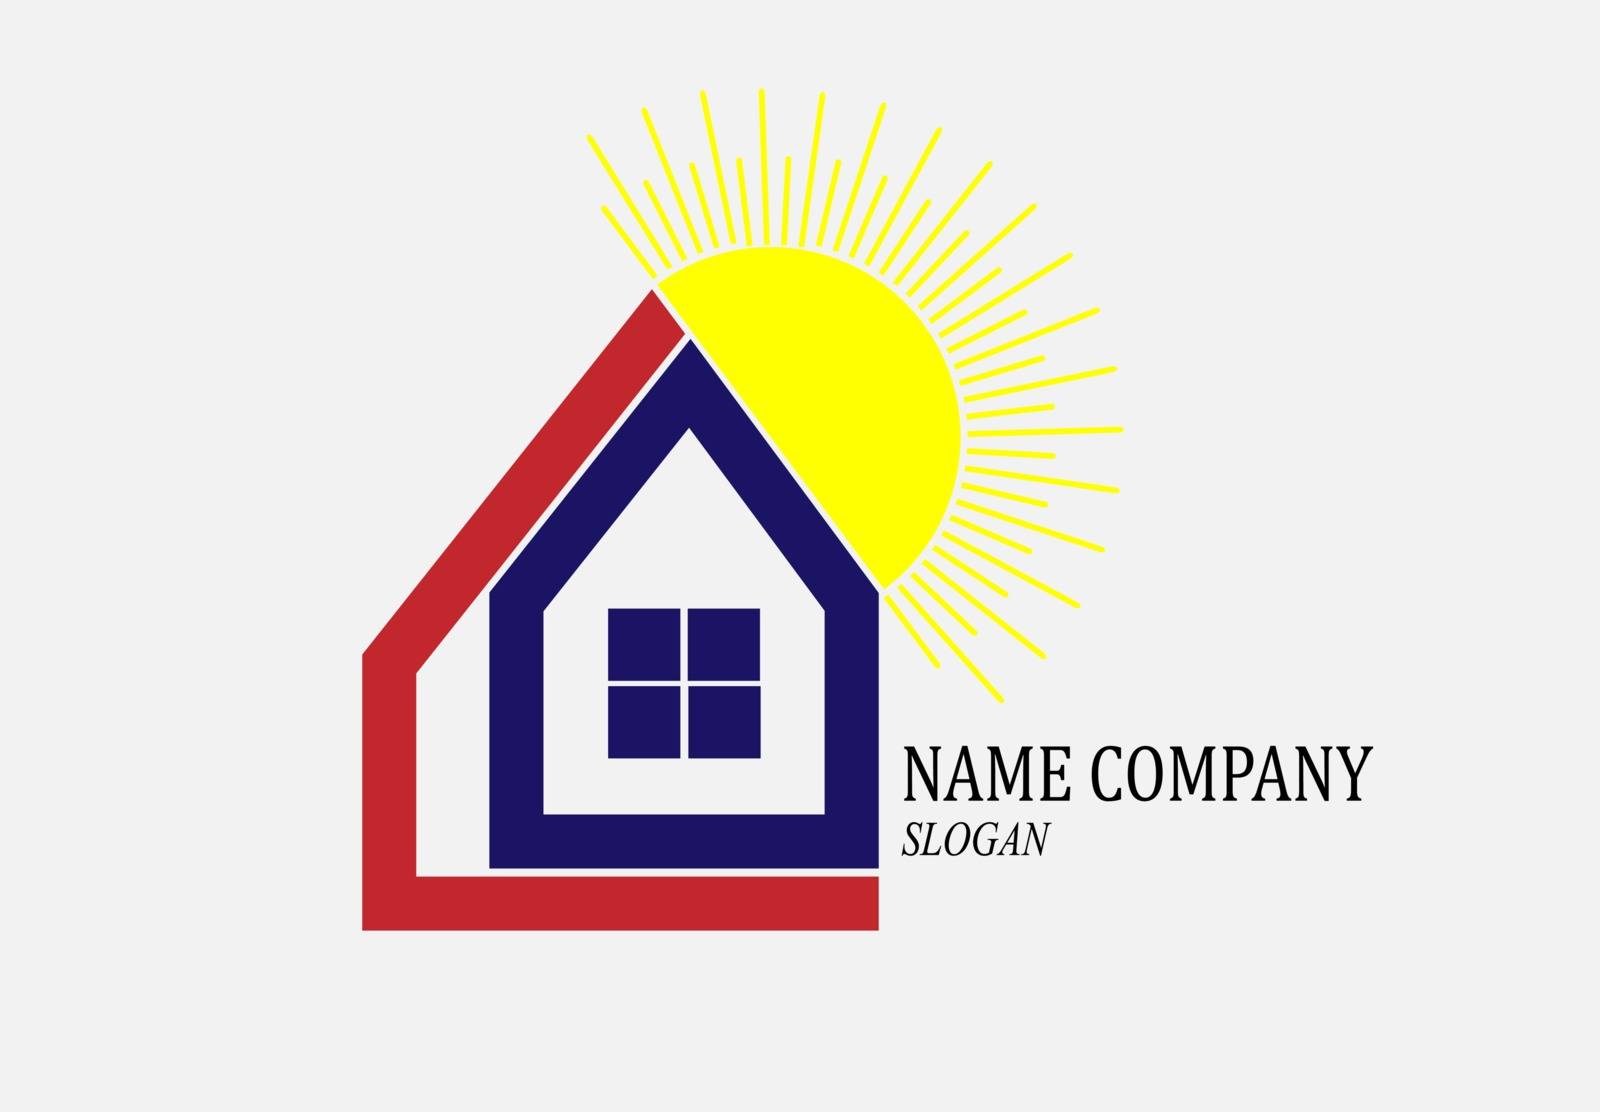 Template for the logo of a construction company and a real estate company